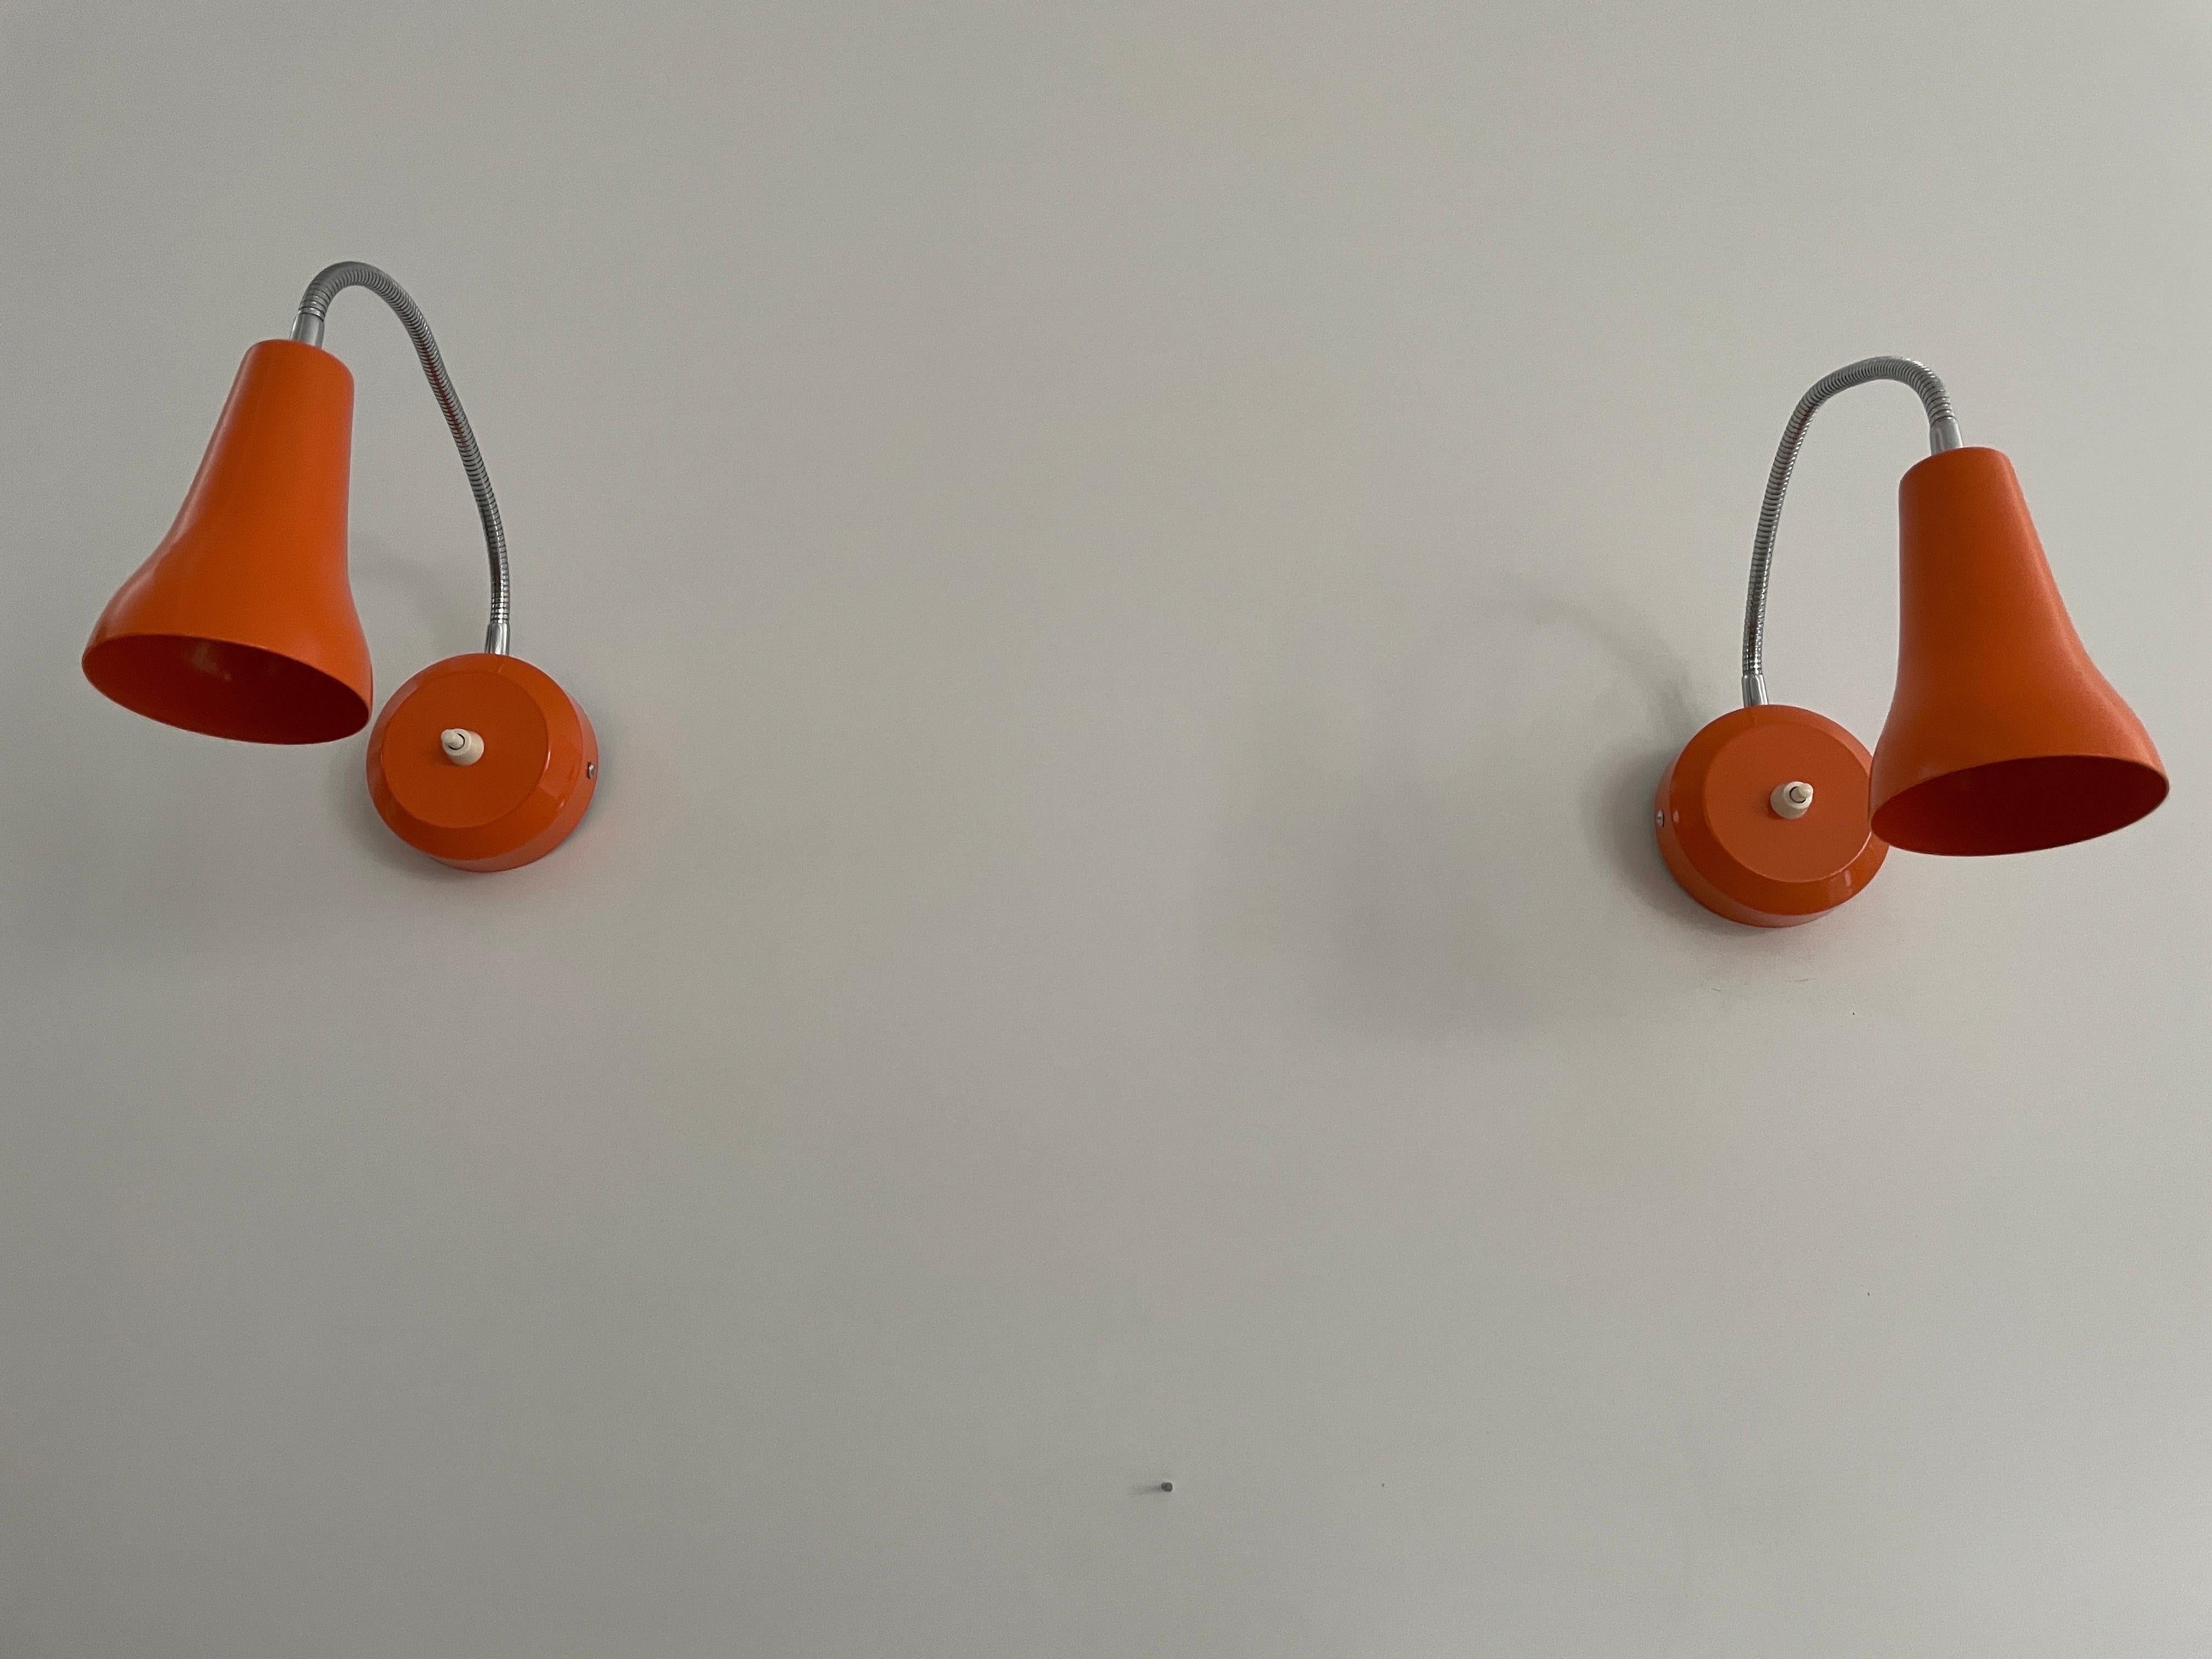 Orange Metal Pair of Gooseneck Sconces, 1970s, Germany

Lampshade is in very good vintage condition. 

This lamp works with E27 light bulb. Max 100W
Wired and suitable to use with 220V and 110V for all countries.


Measurements:
Open length: 48